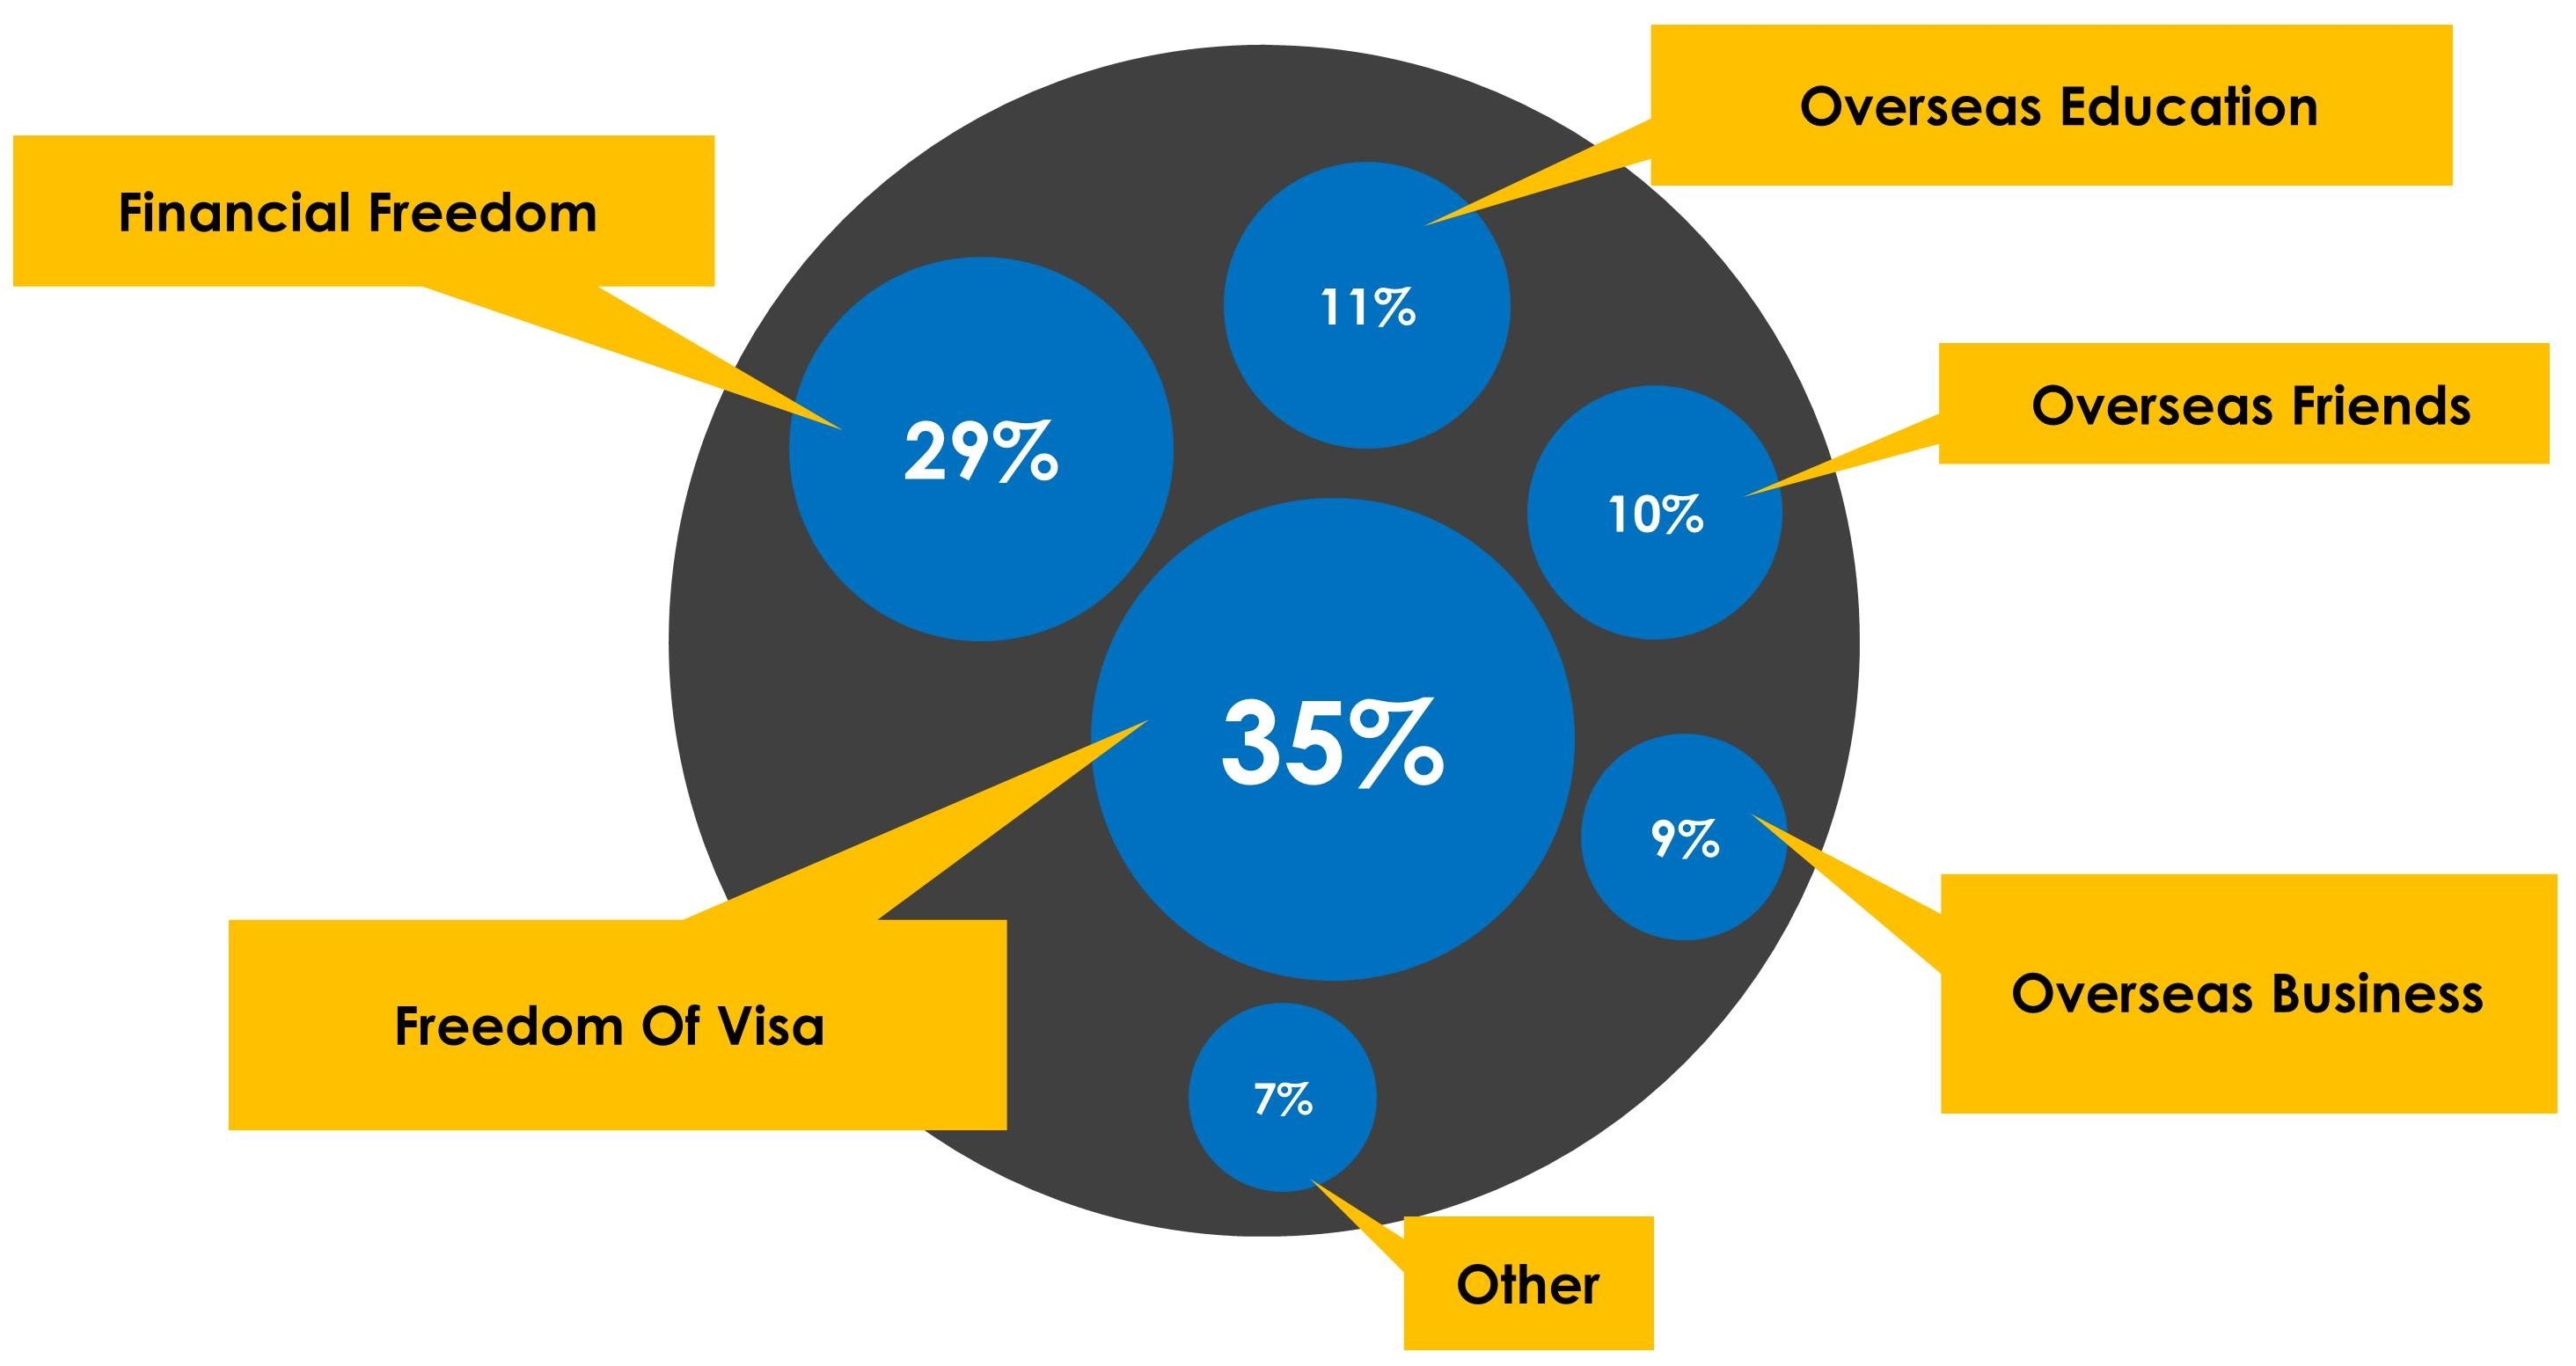 Diagram shows the 6 reasons cited for becoming a global citizen with Freedom of Visa and Financial Freedom the top 2.